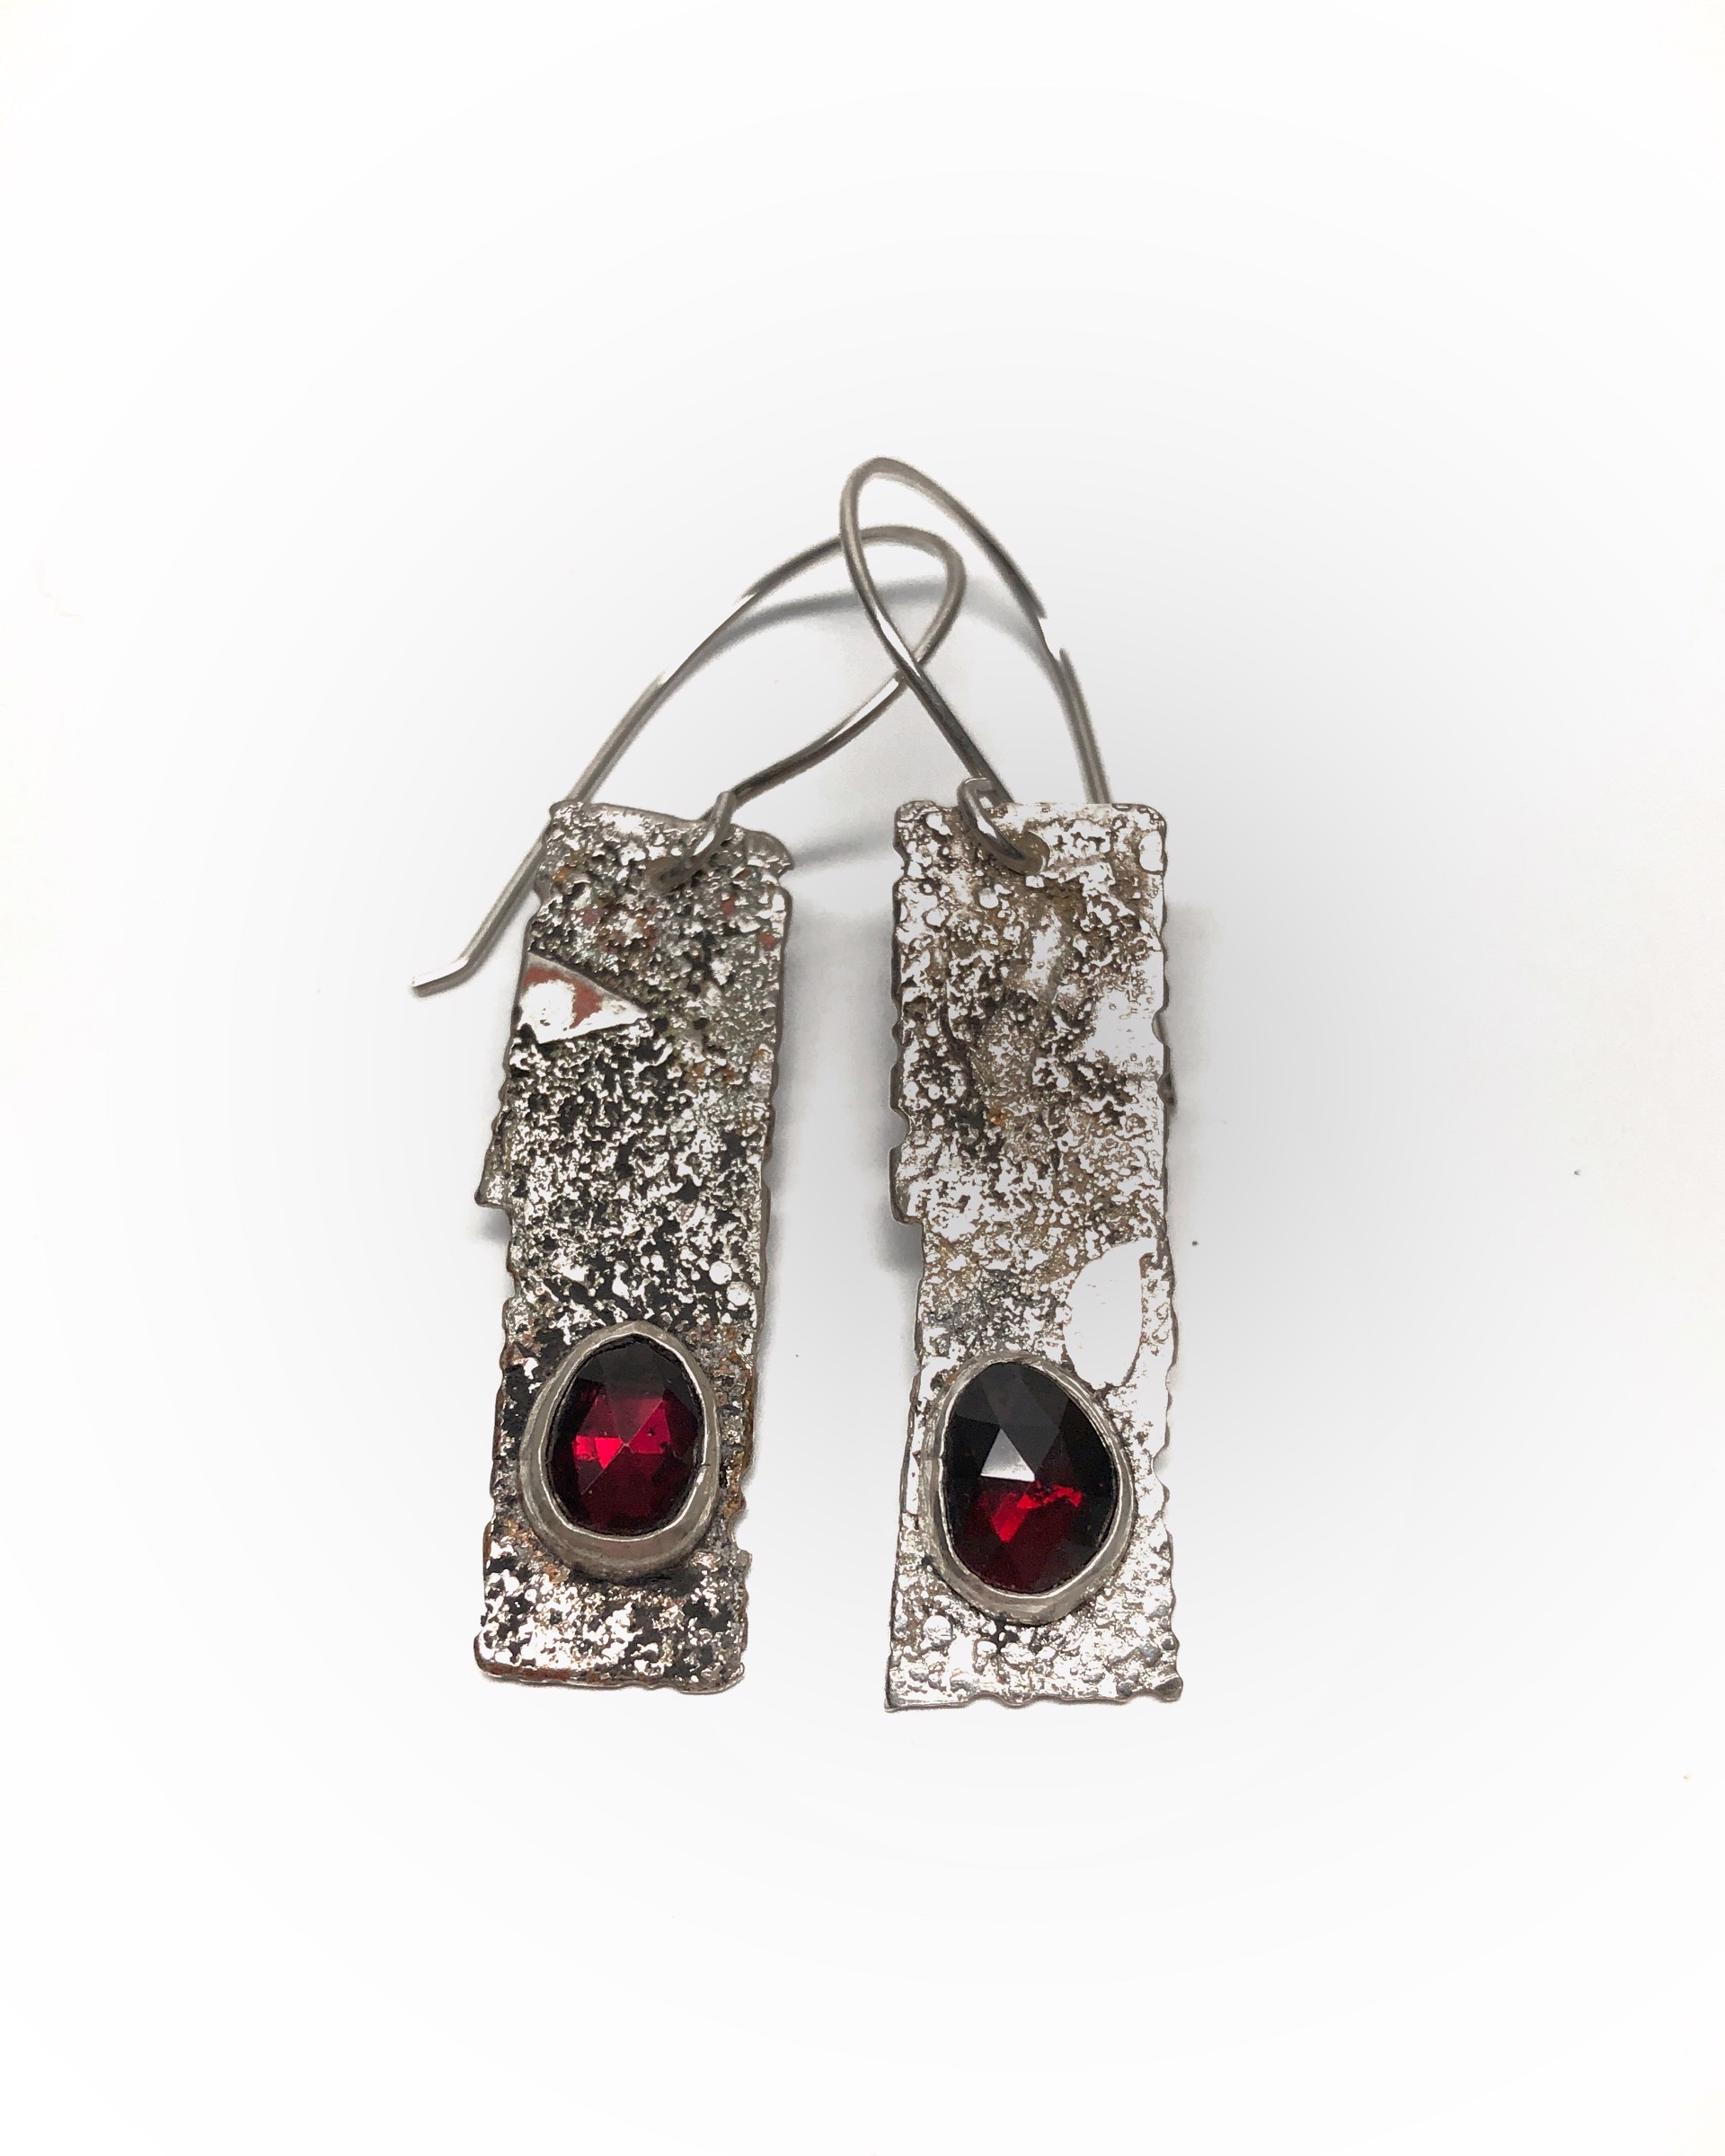 Textured Silver and Garnet Dangle Earrings by Carli Schultz